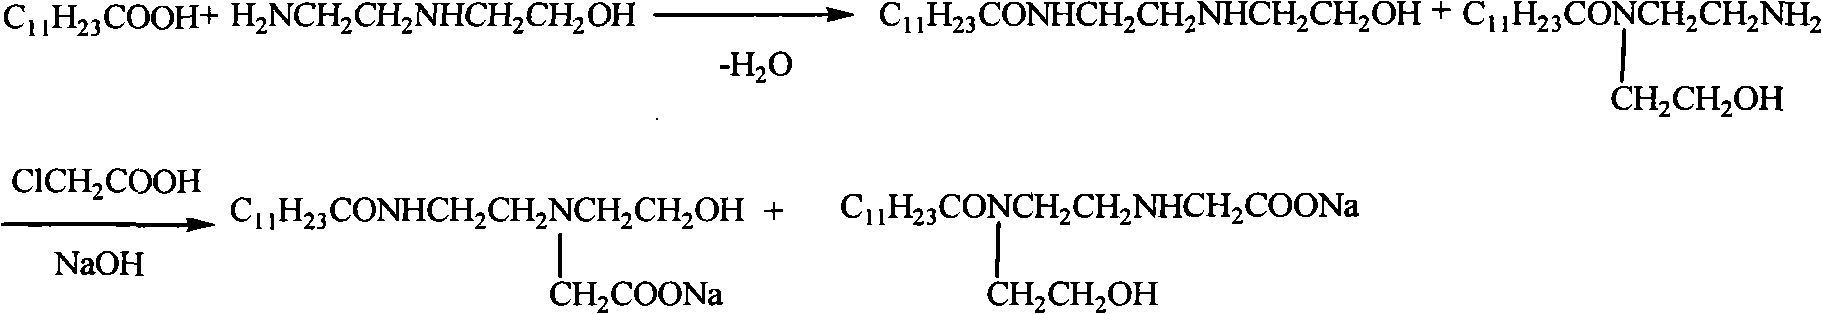 Dodecoic acid acidamide surfactant and synthetic method